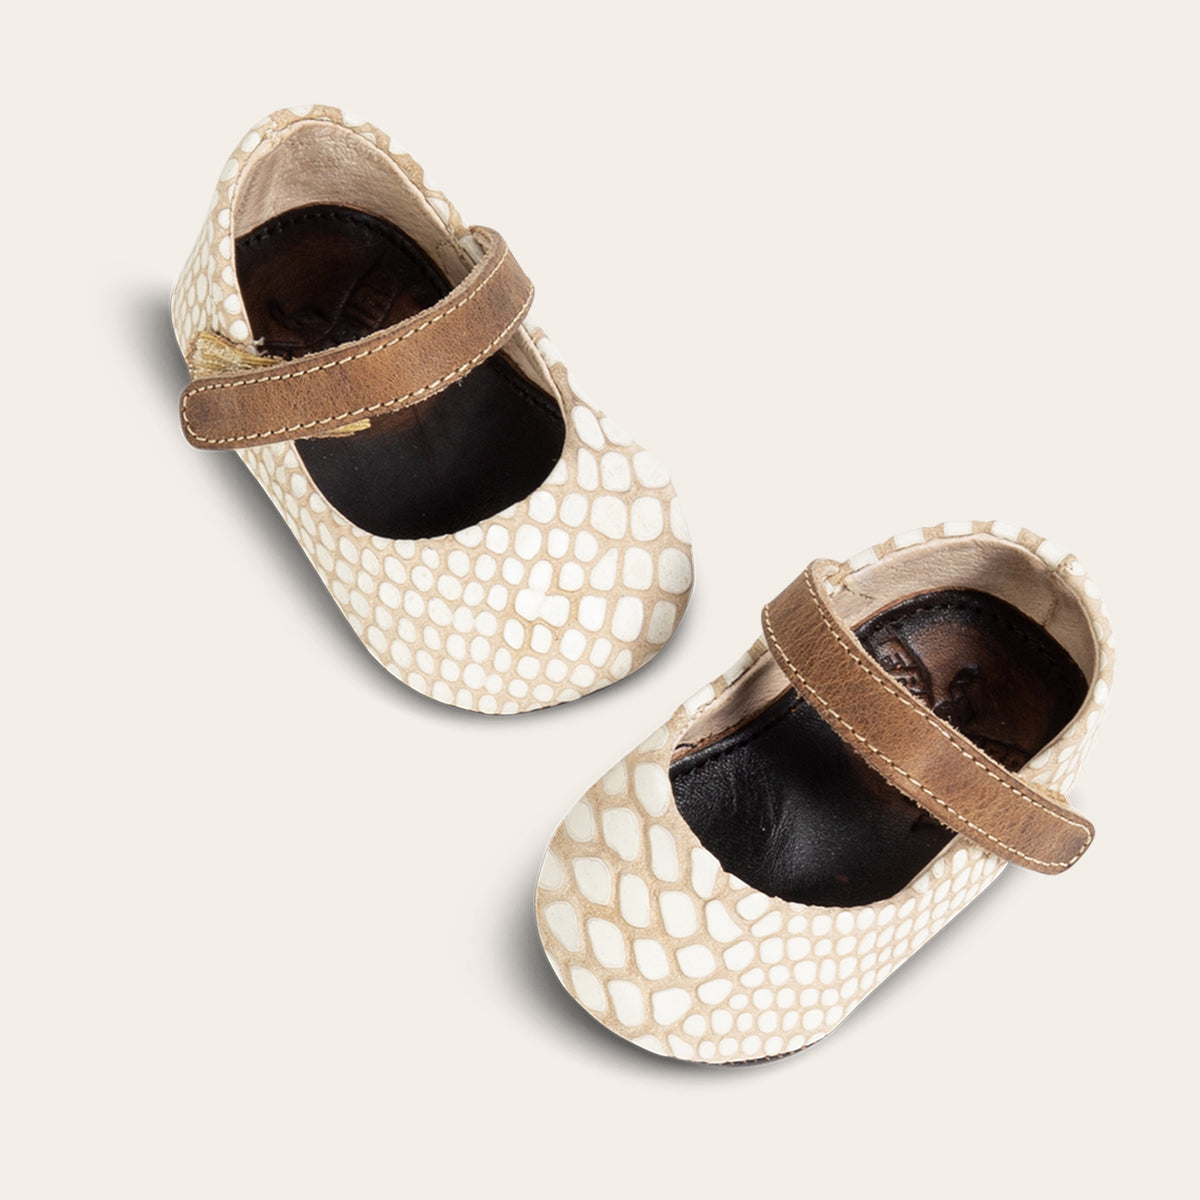 front view showing top leather strap on FREEBIRD infant baby Jane white snake leather shoe